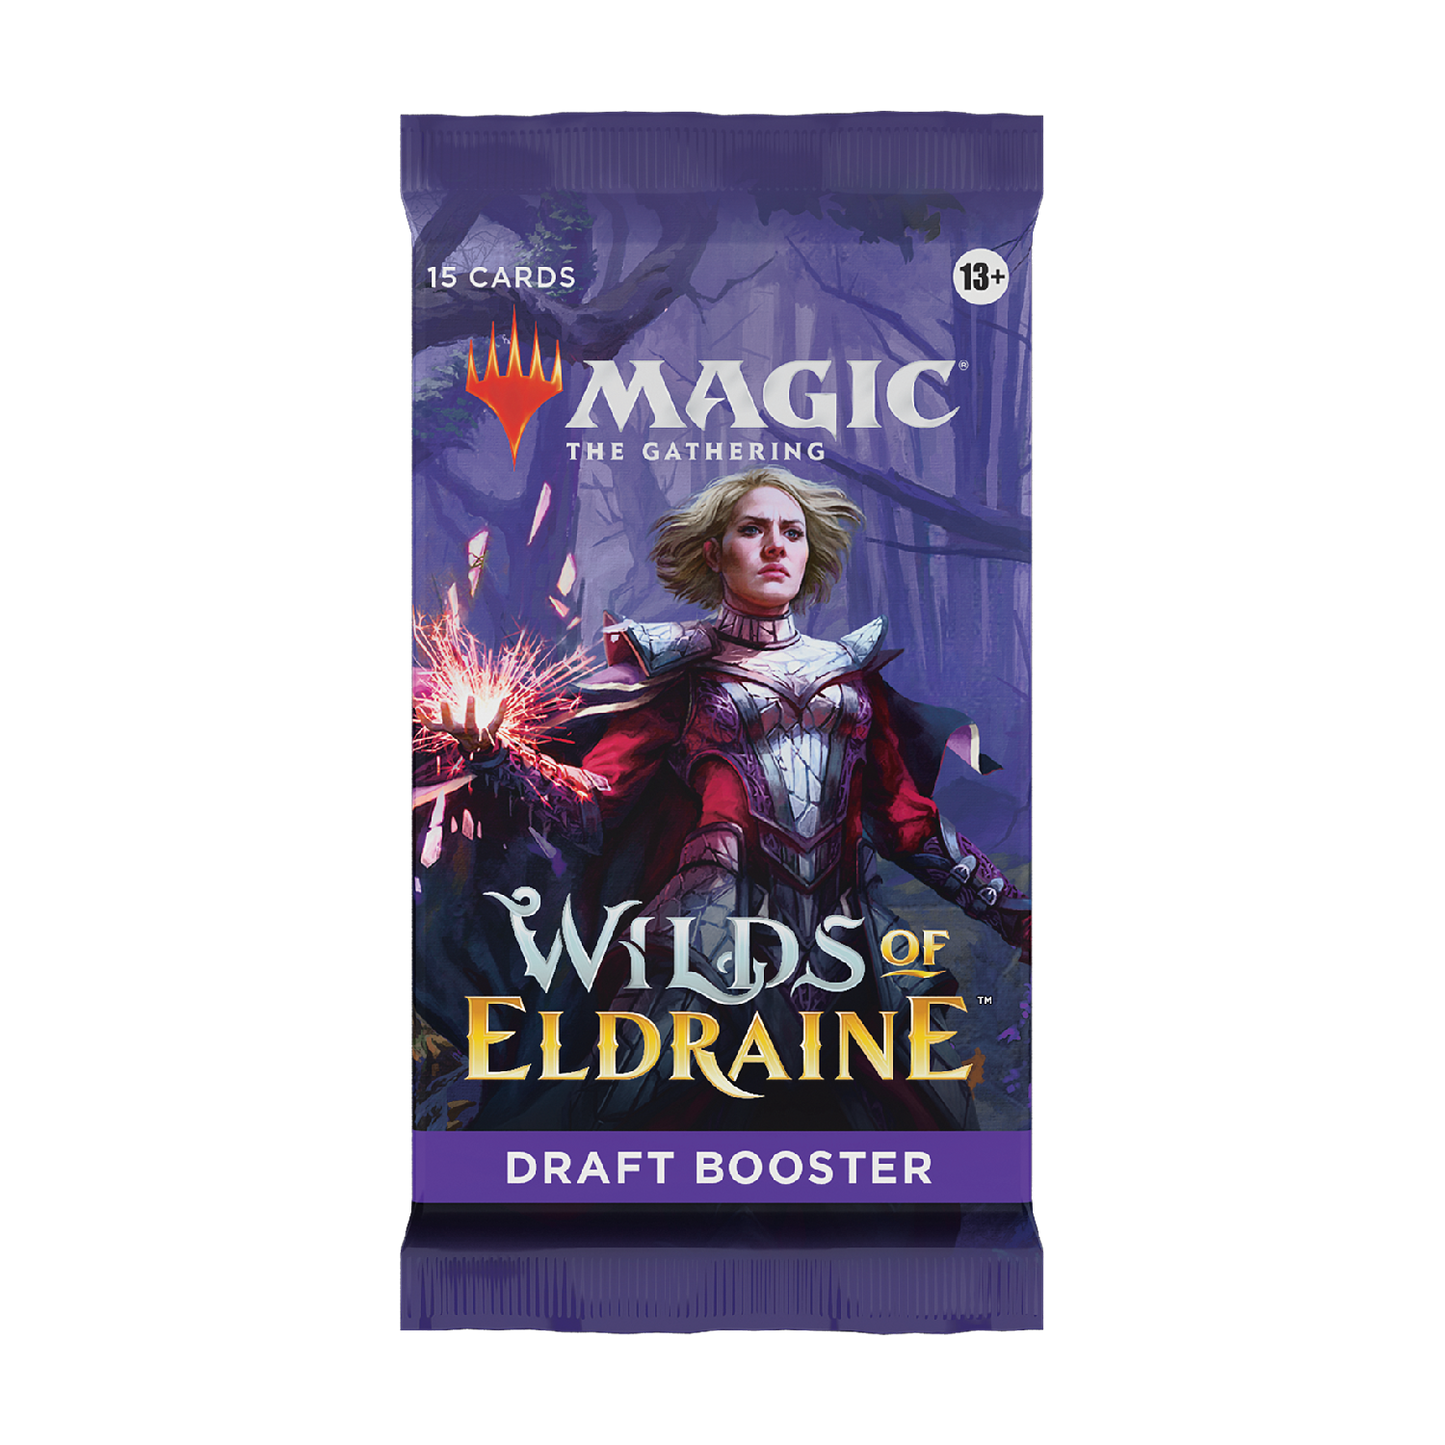 Magic: The Gathering Wilds of Eldraine Draft Booster (15 Magic Cards)